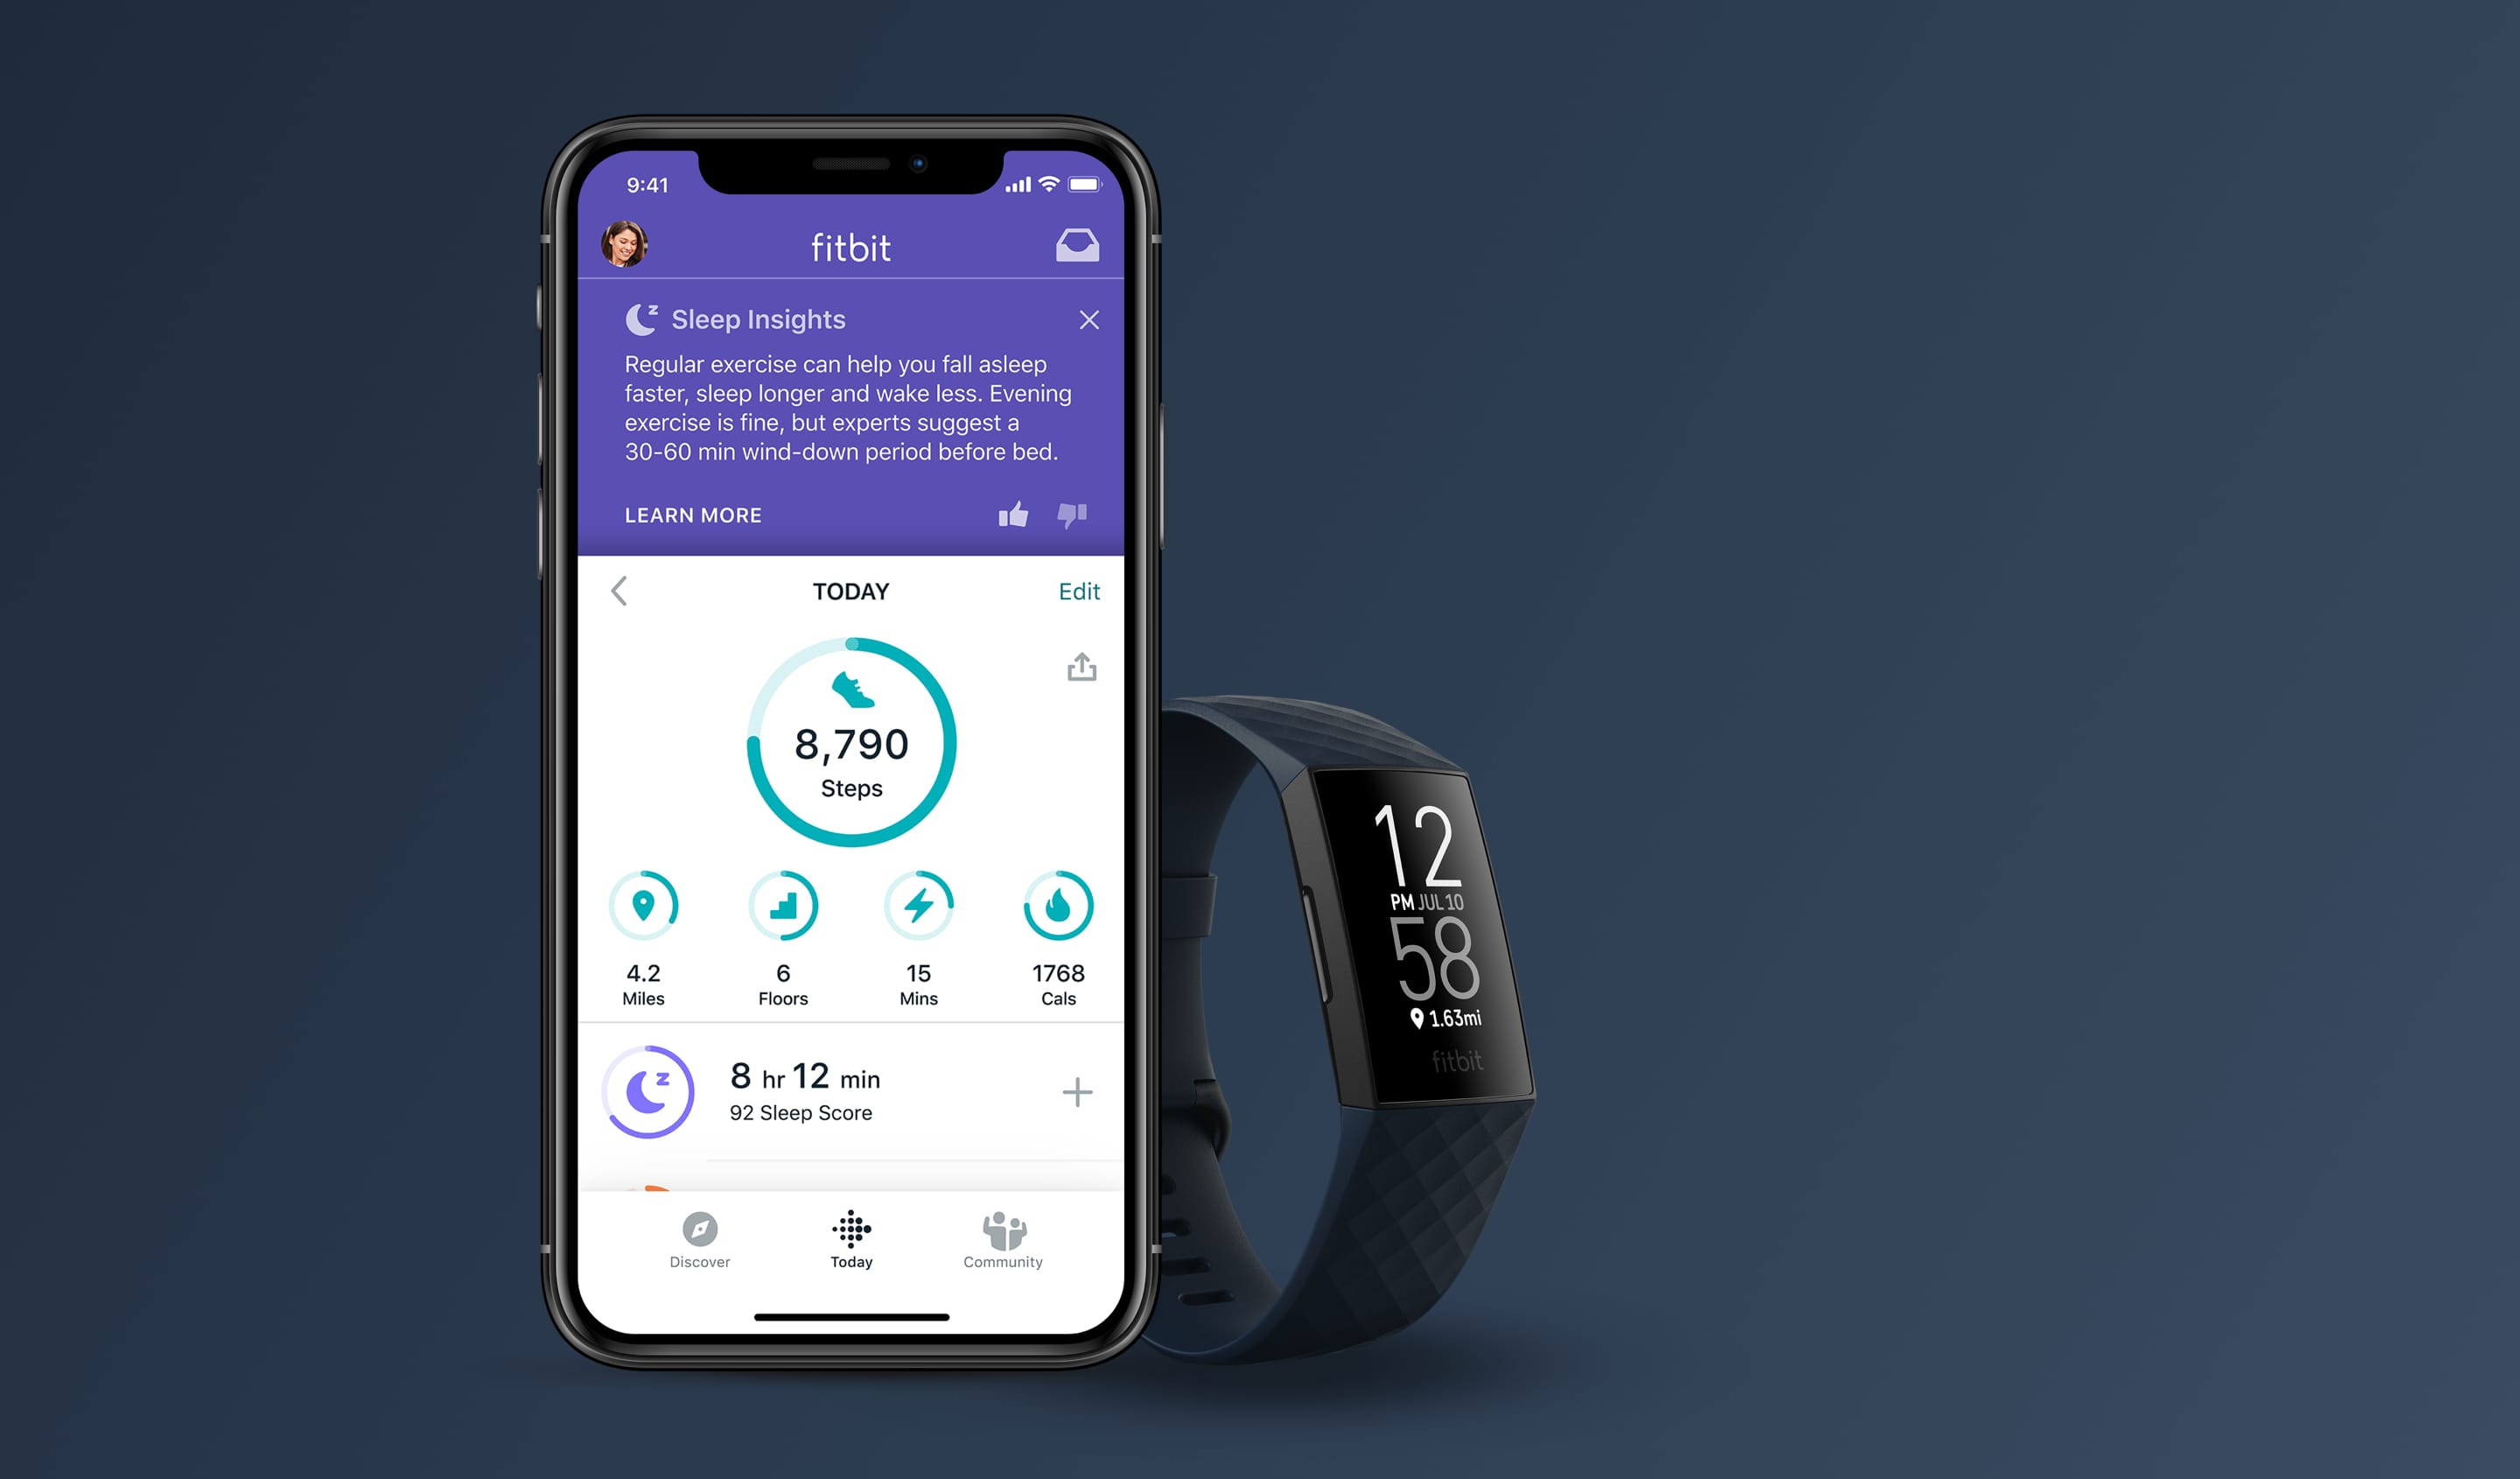 fitness tracker compatible with fitbit app